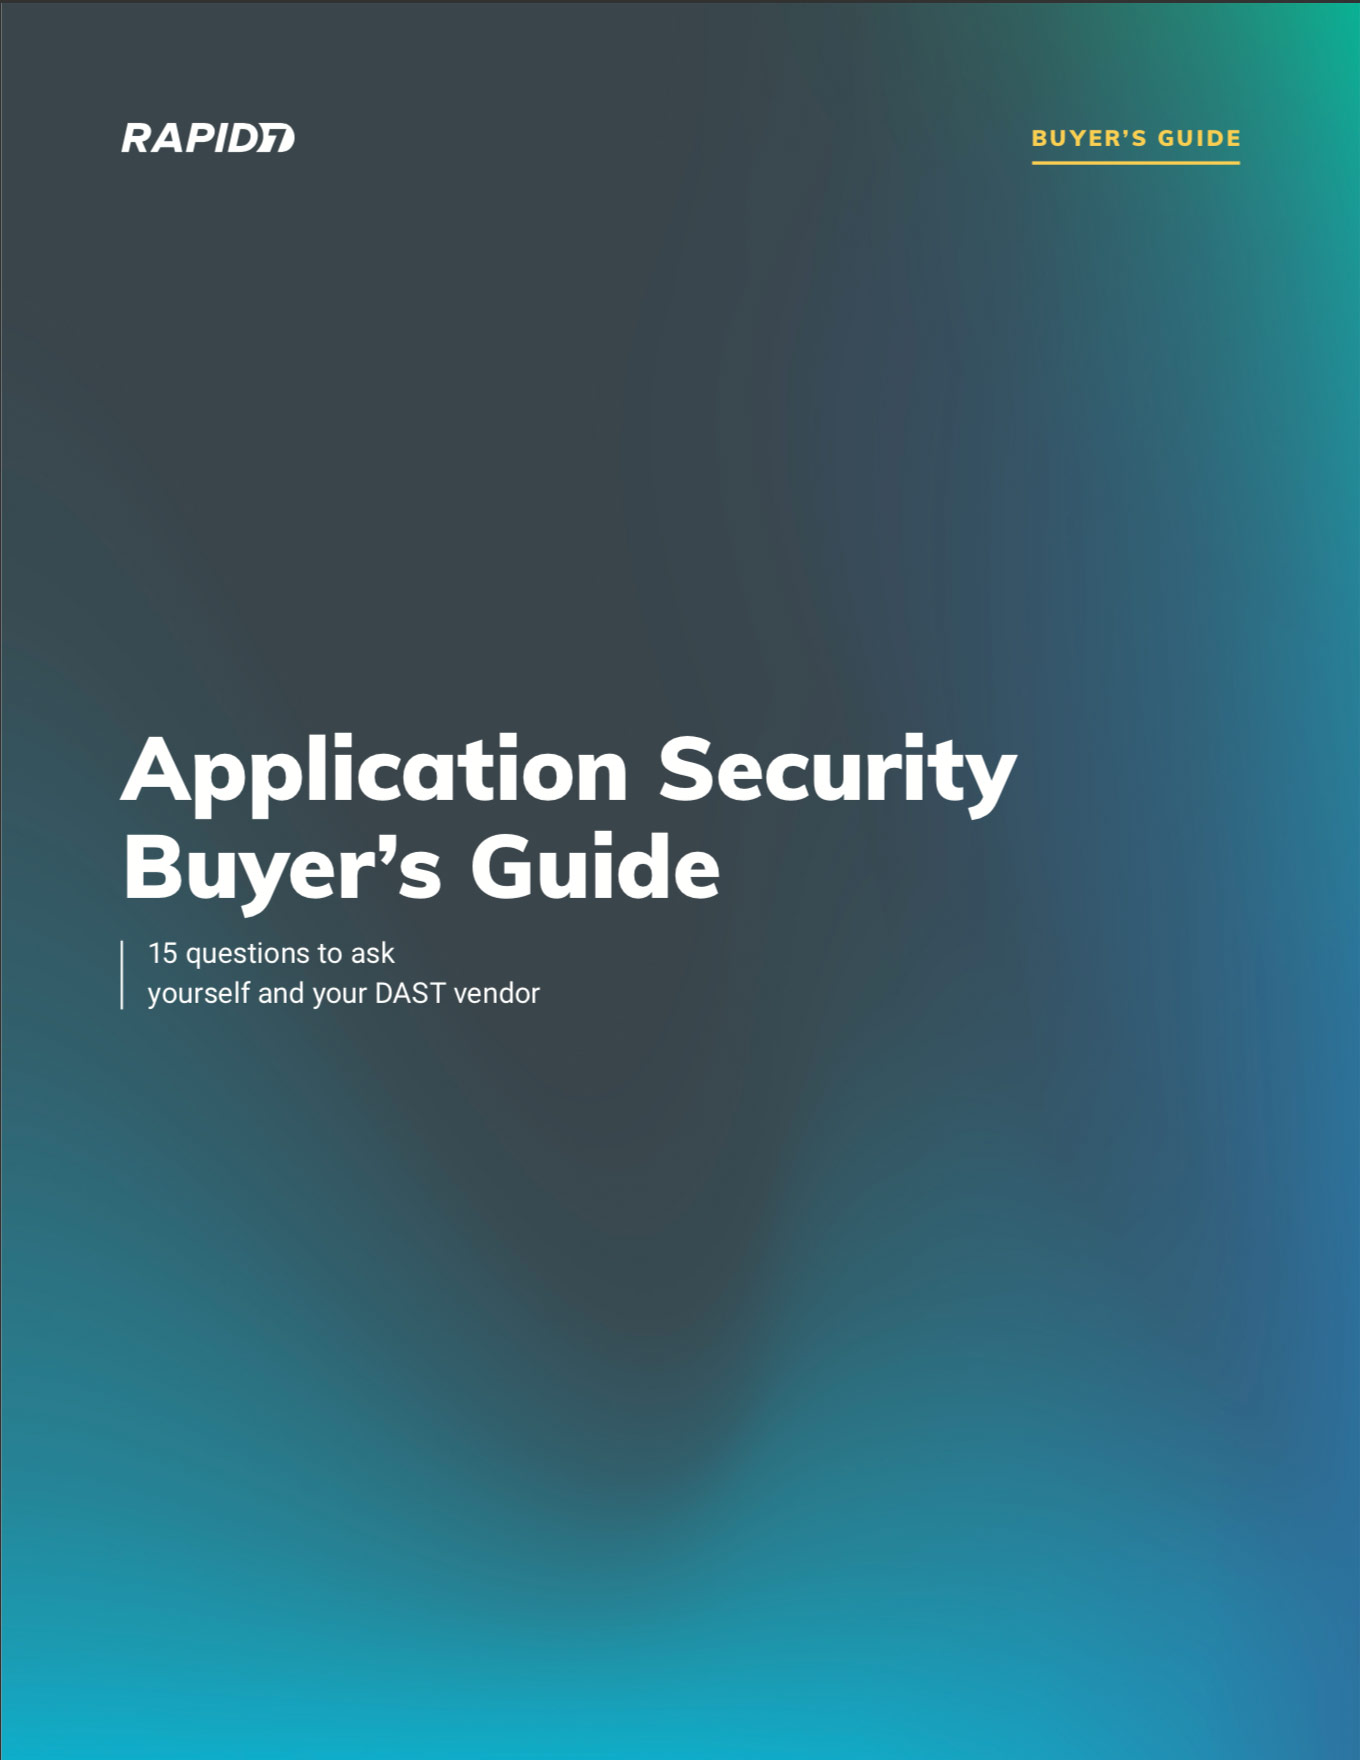 Application Security Buyer's Guide